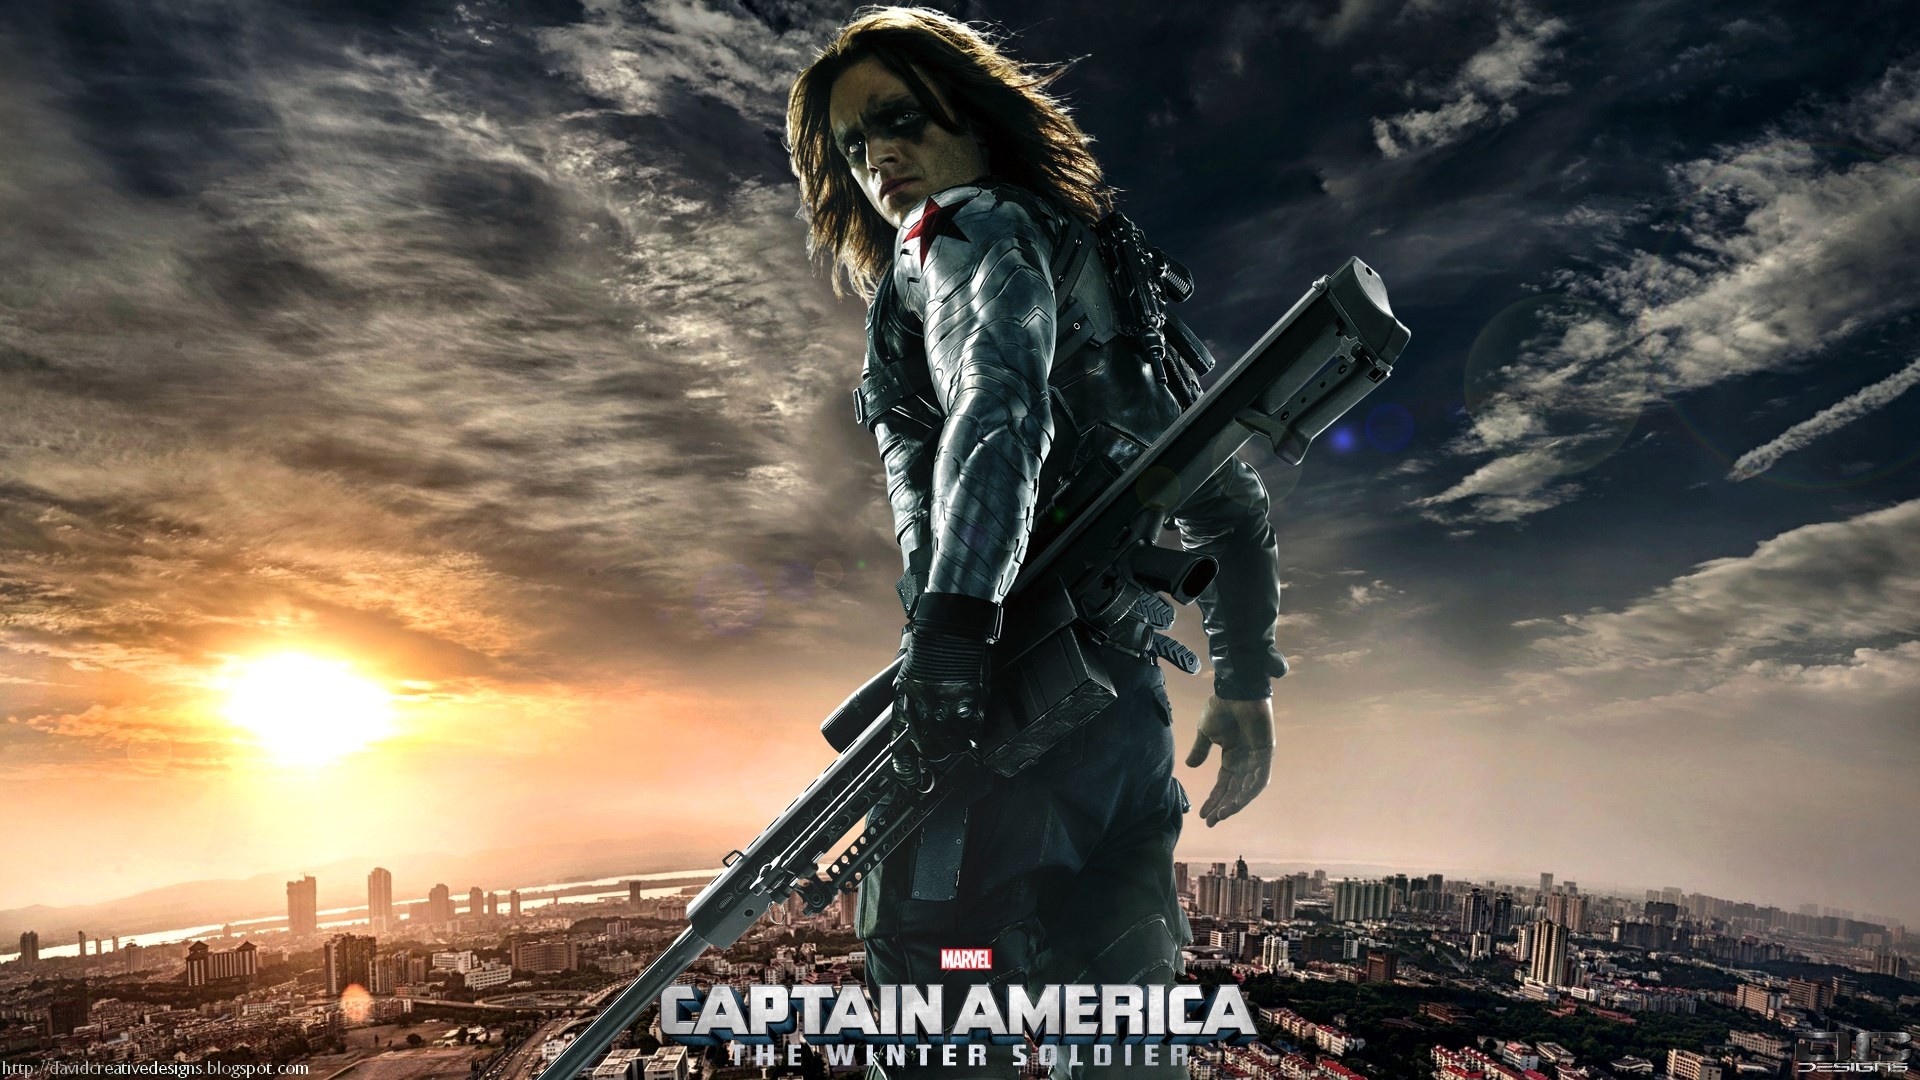 1920x1080 Captain America - The Winter Soldier - Anthony & Joe Russo